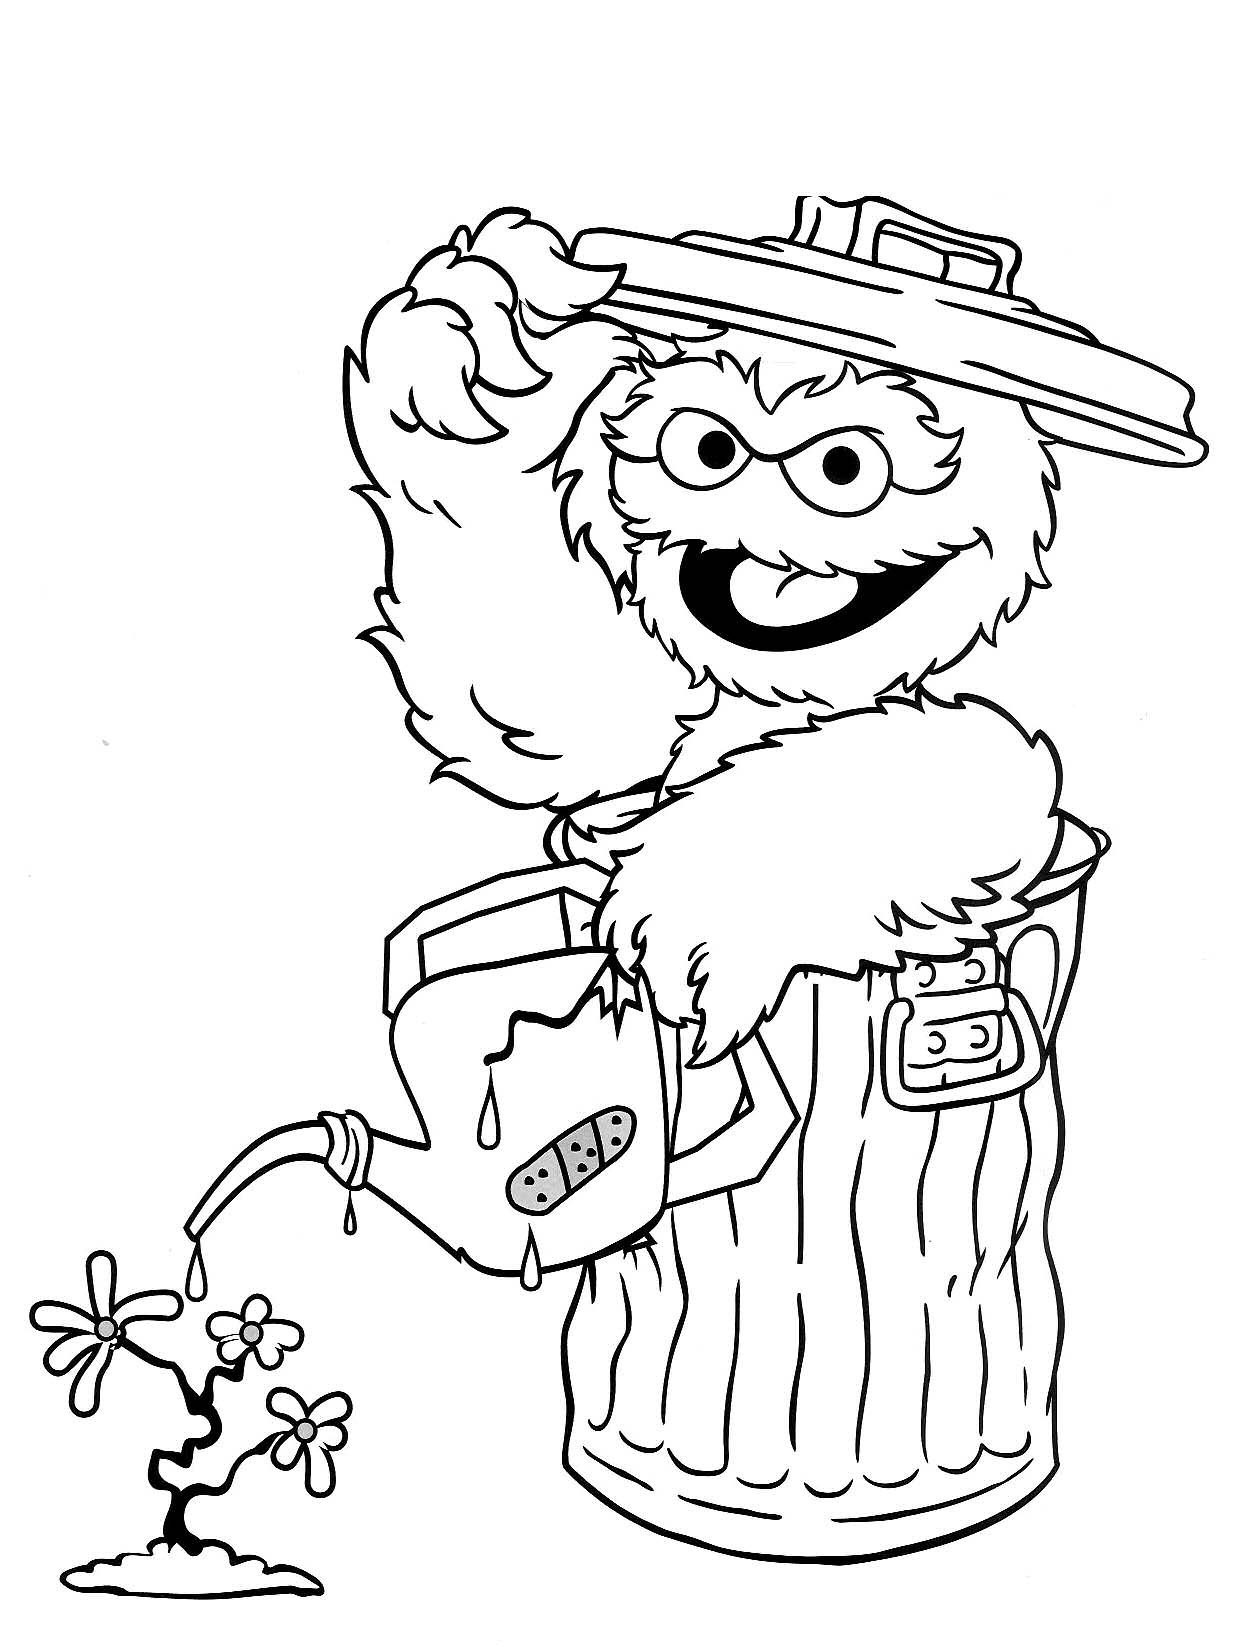 Coloring pages sesame street coloring sheets for kids pictures free printable abby cadabby pages